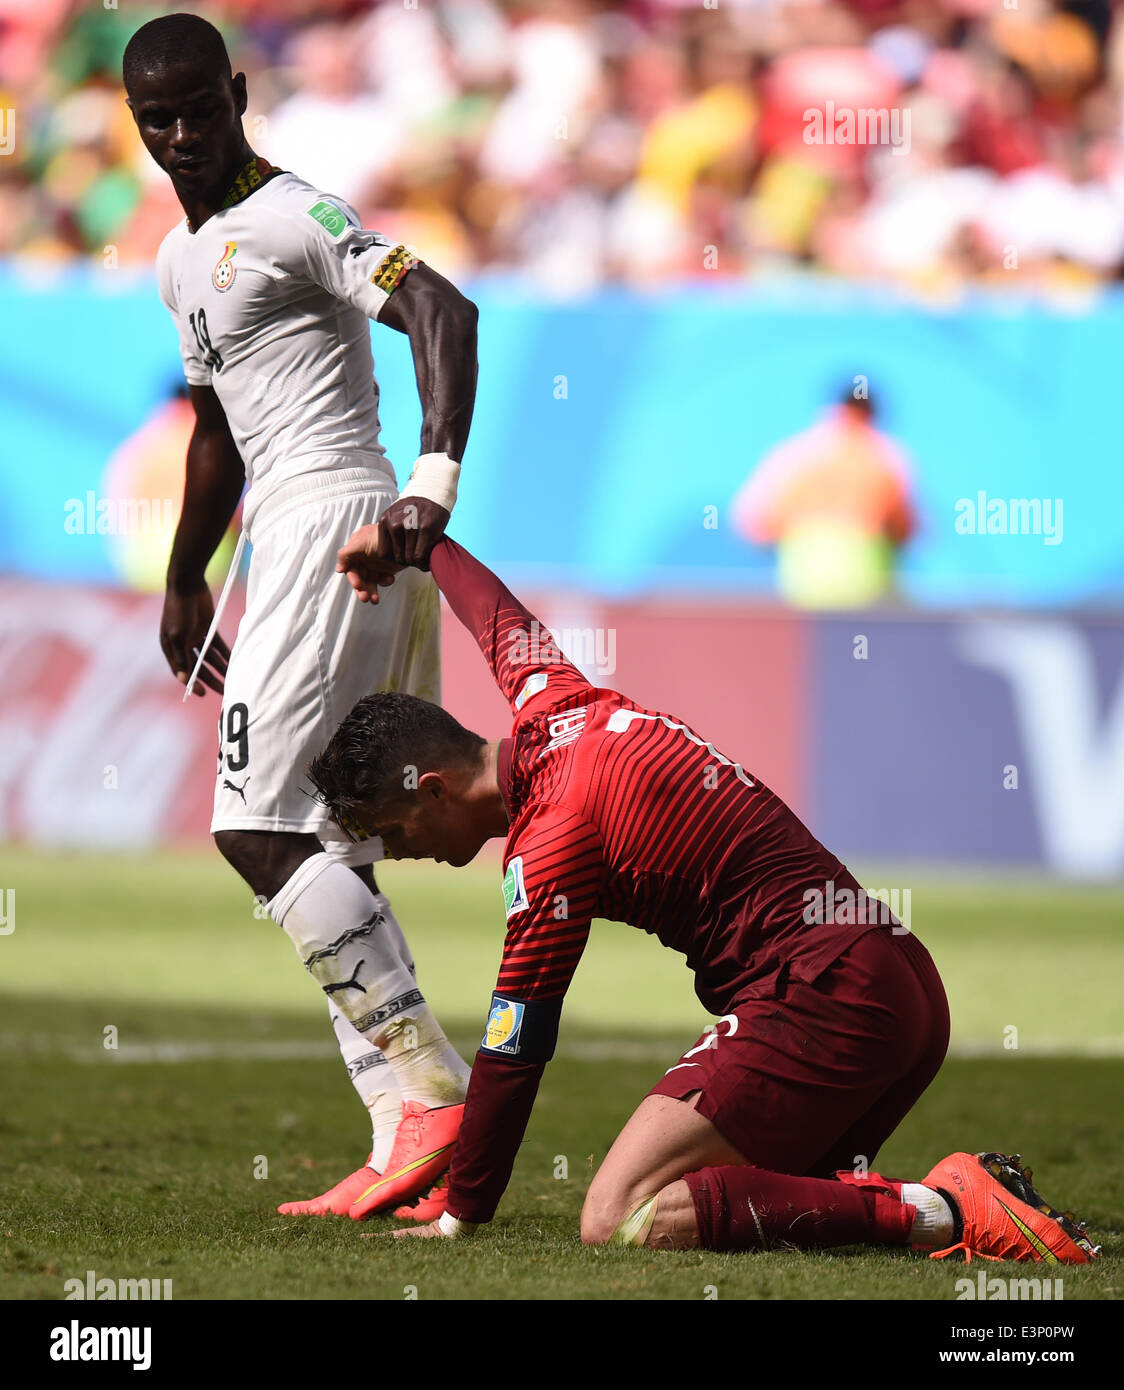 Brasilia, Brazil. 26th June, 2014. Jonathan Mensah (L) of Ghana helps up Cristiano Ronaldo (R) of Portugal during the FIFA World Cup 2014 group G preliminary round match between Portugal and Ghana at the Estadio National Stadium in Brasilia, Brazil, on 26 June 2014 Credit: © dpa picture alliance/Alamy Live News  Stock Photo